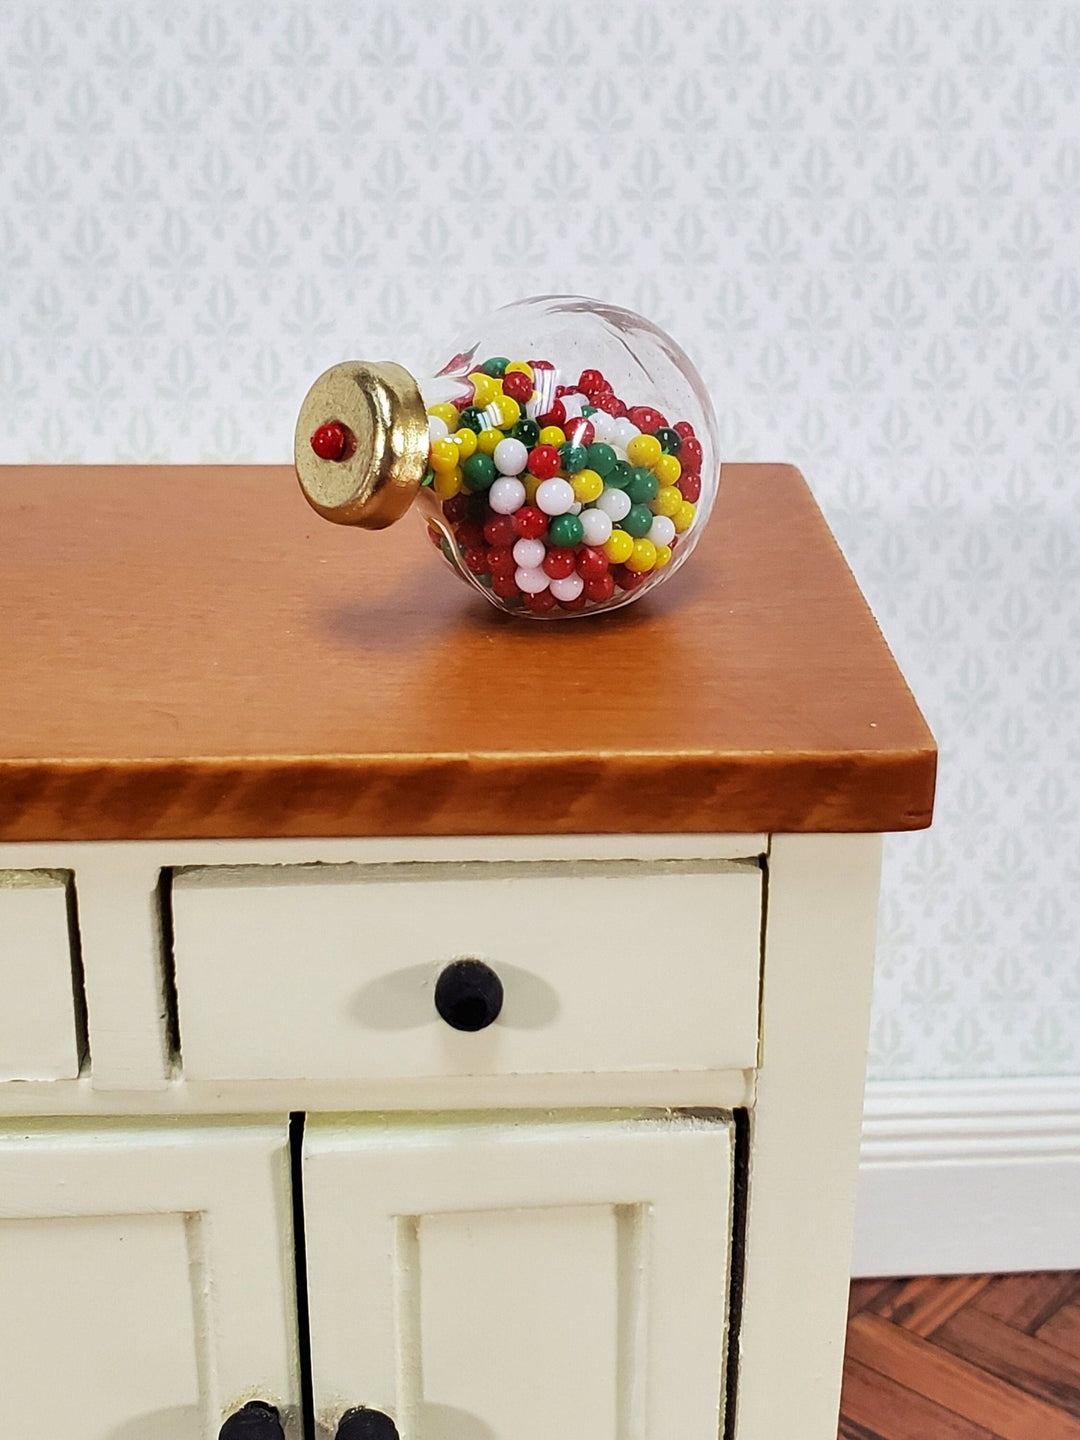 Dollhouse Glass Candy Jar Filled with Candy Bubble Gum Treats 1:12 Scale Miniature - Miniature Crush